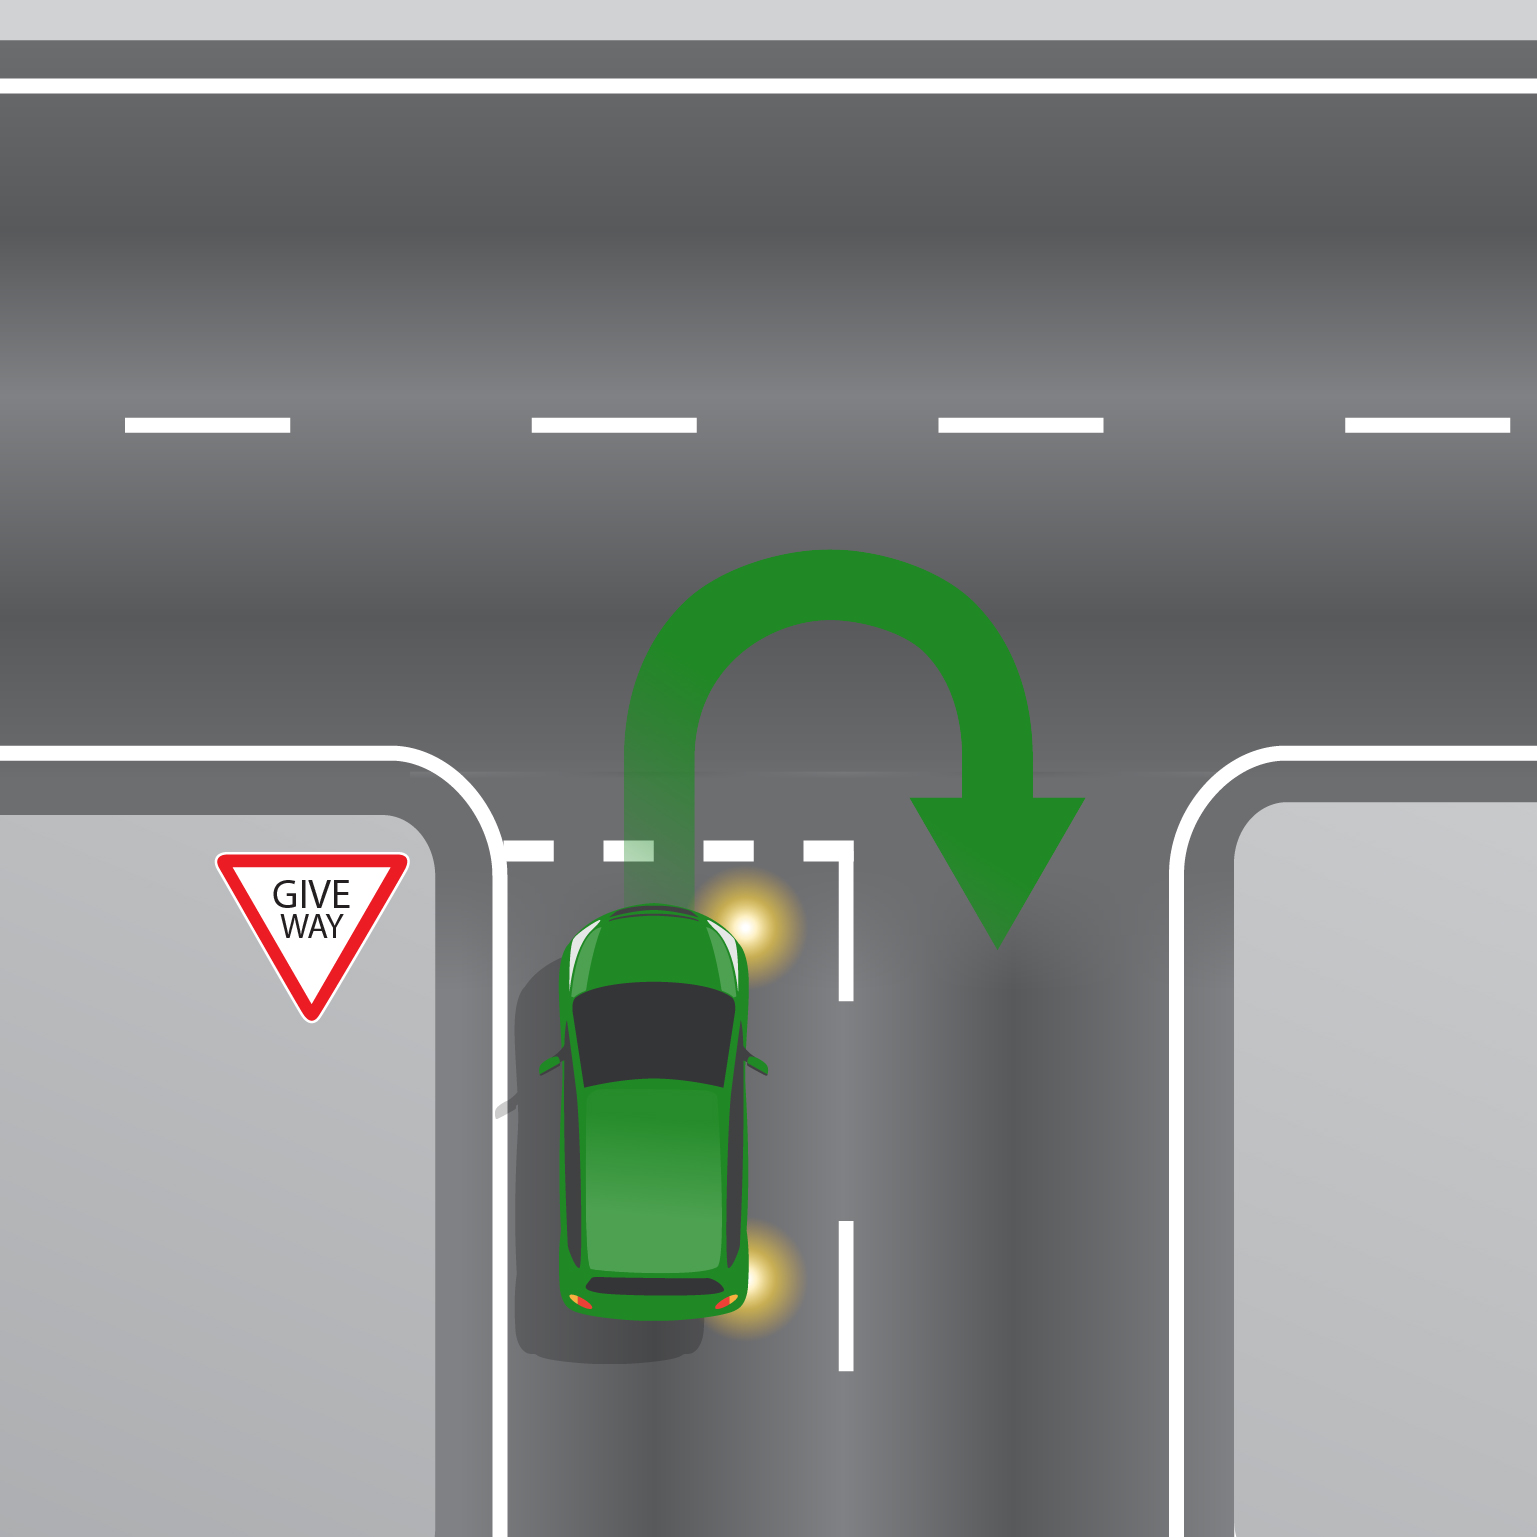 A car making a U-turn at a T-intersection, going back the same direction it came from